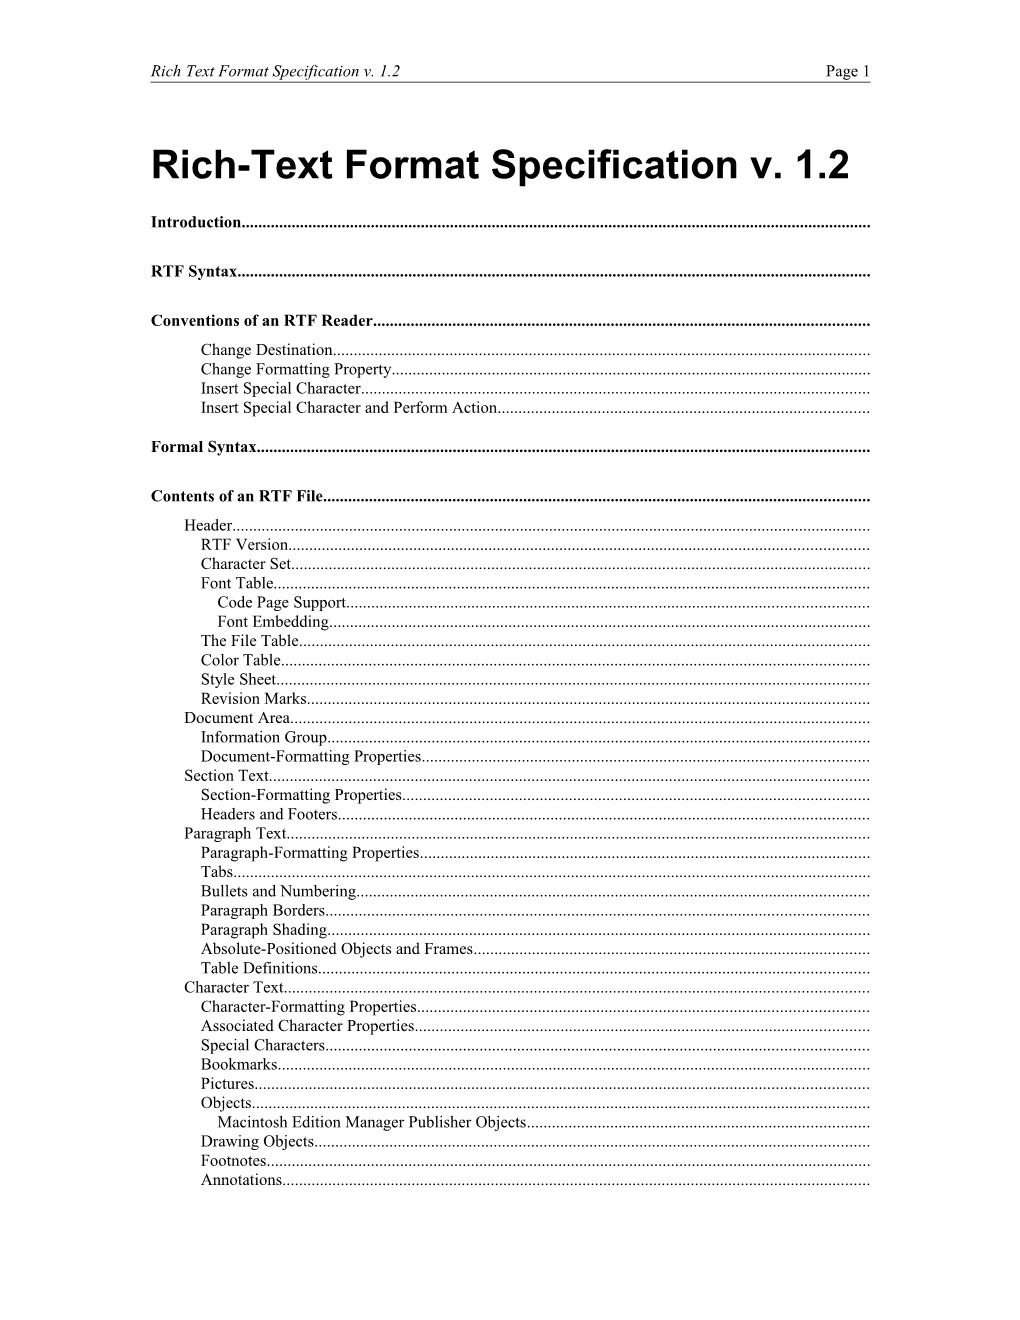 Rich-Text Format Specification